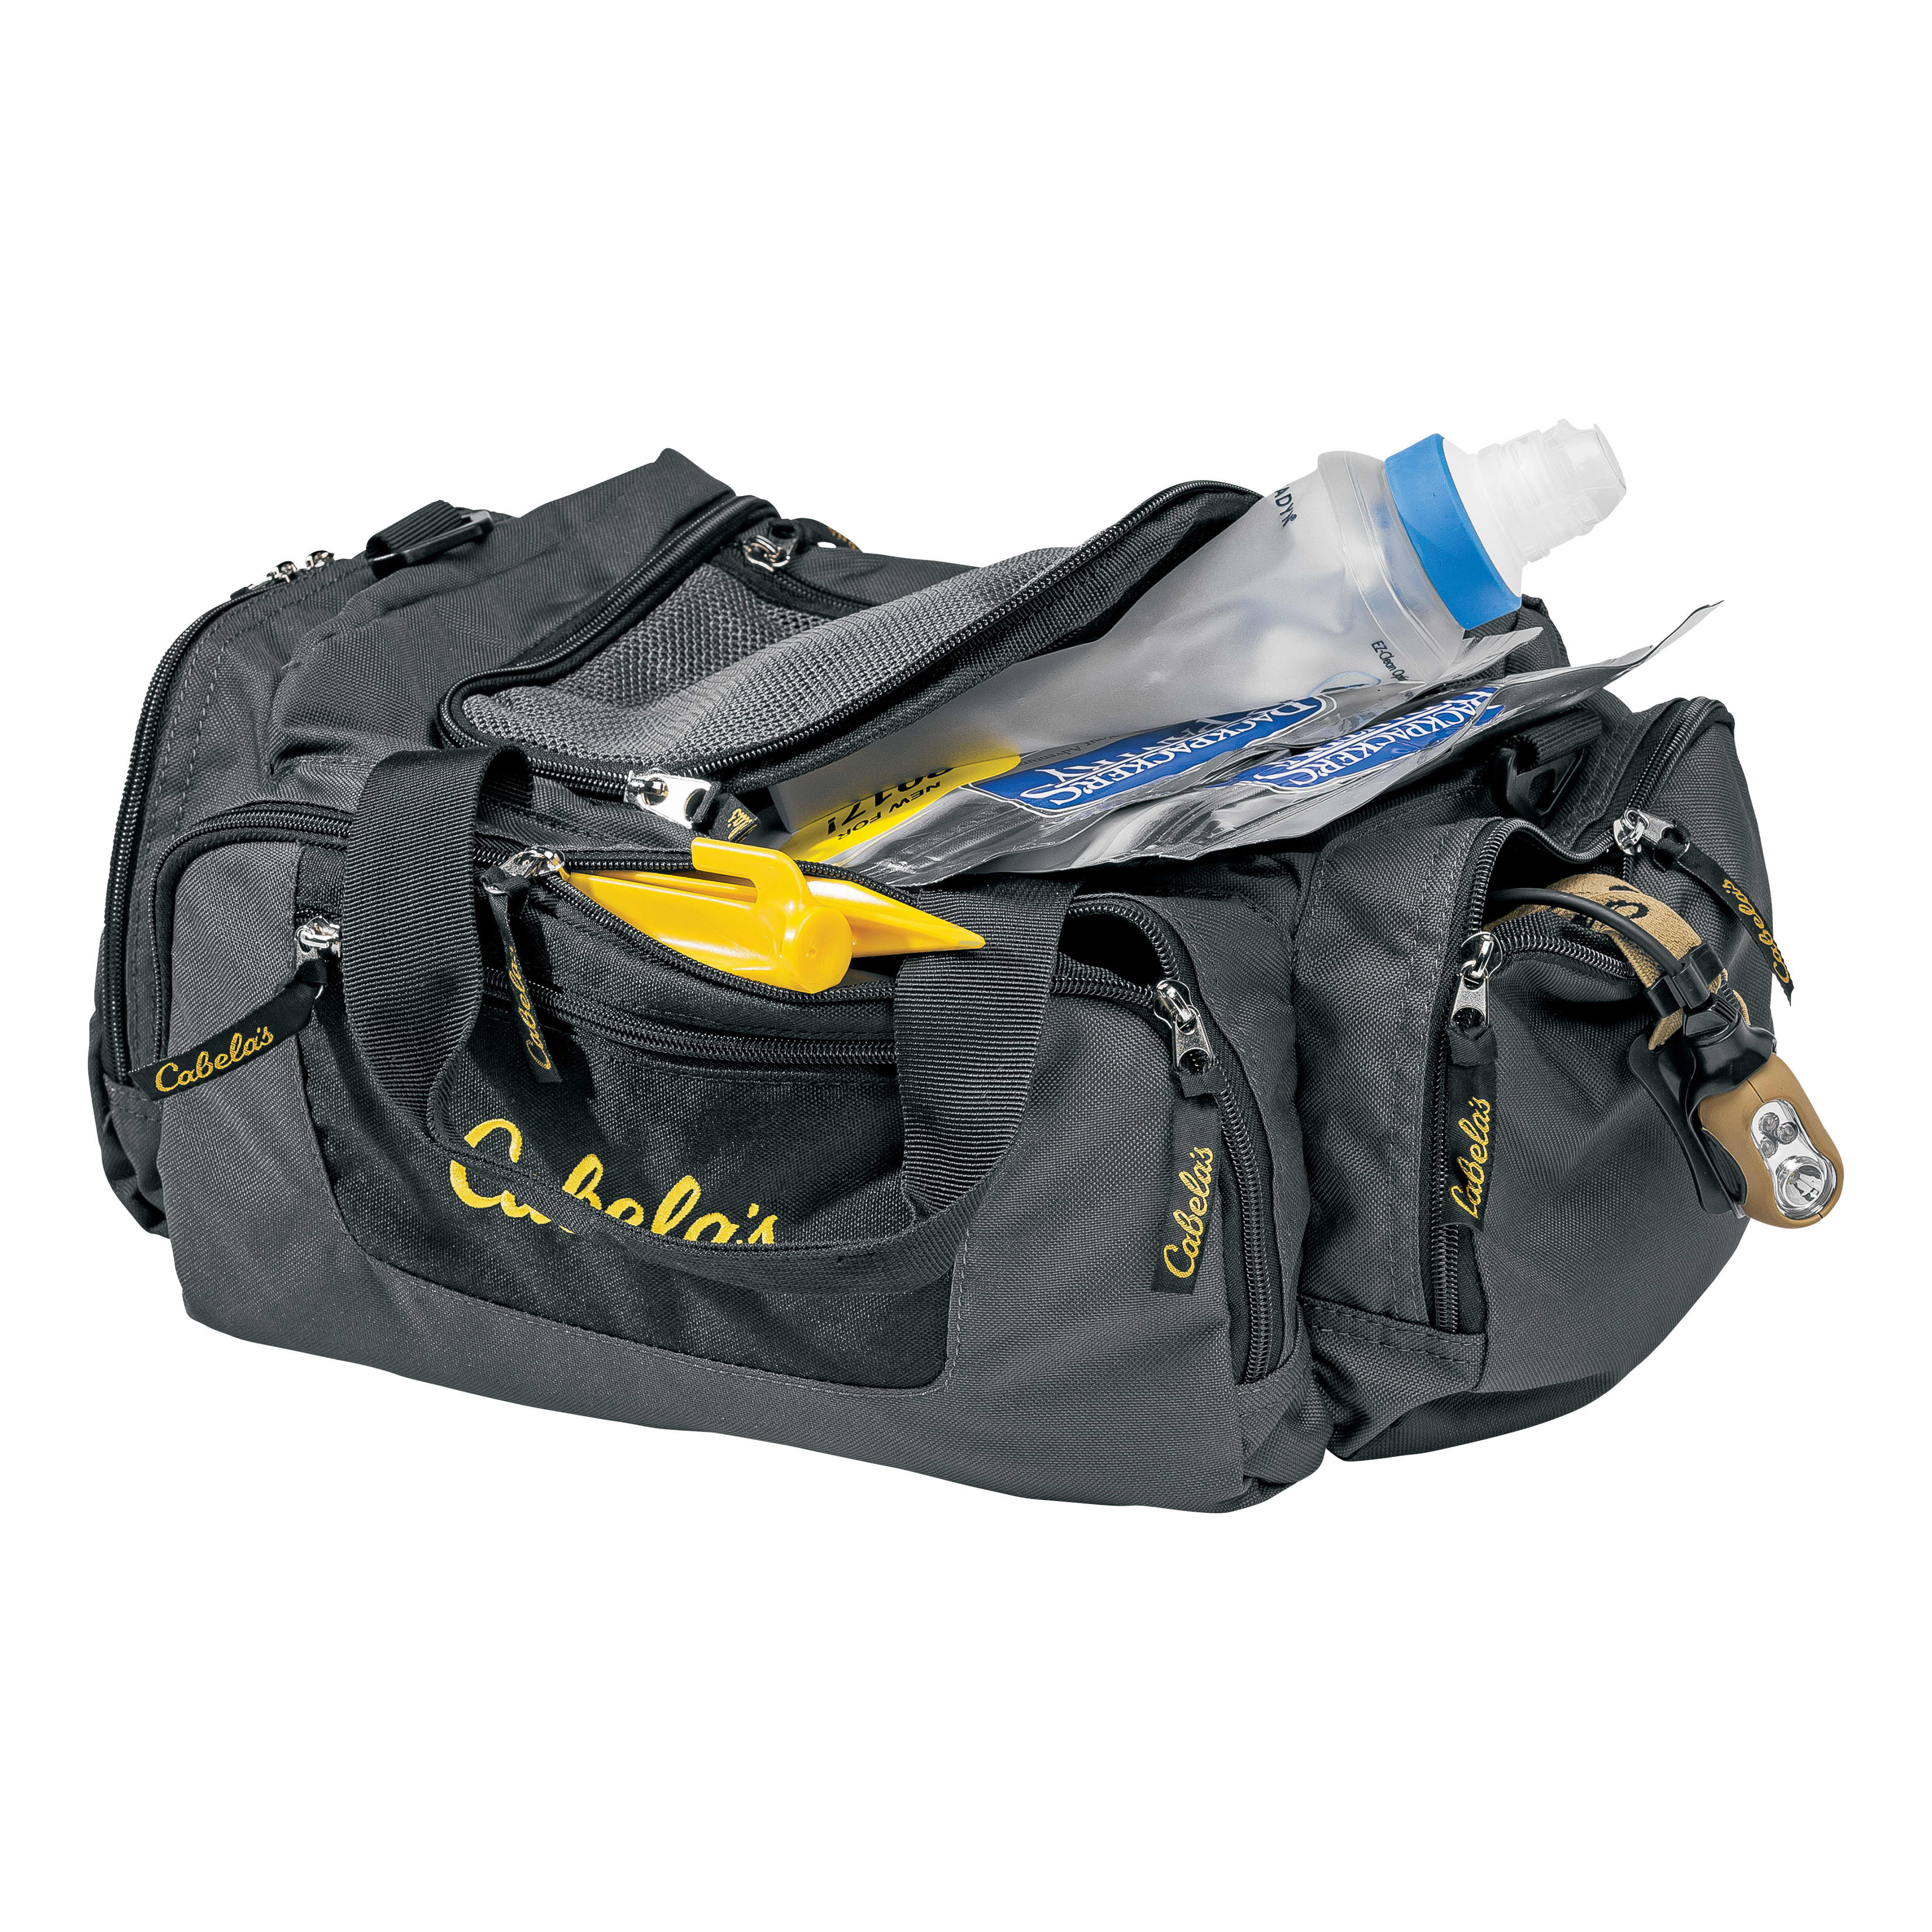 Cabela's Catch-All Gear Bags - Grey - Open View